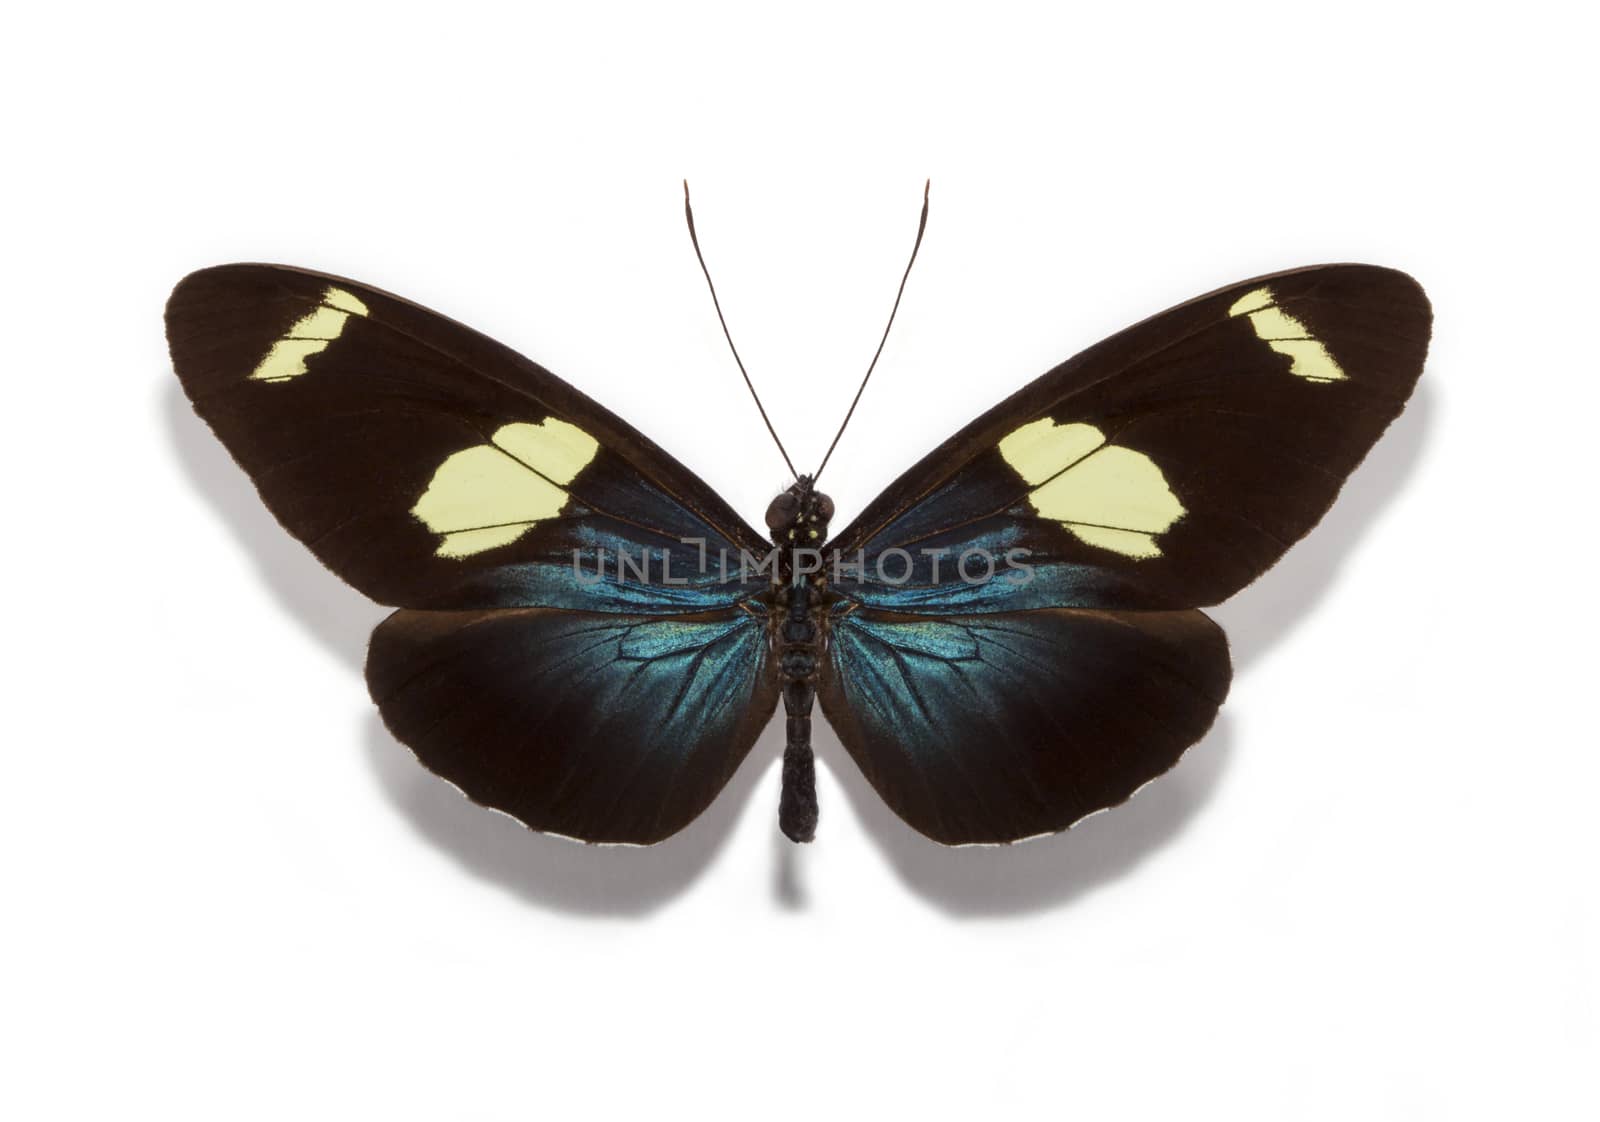 Heliconius sara butterfly by Olvita